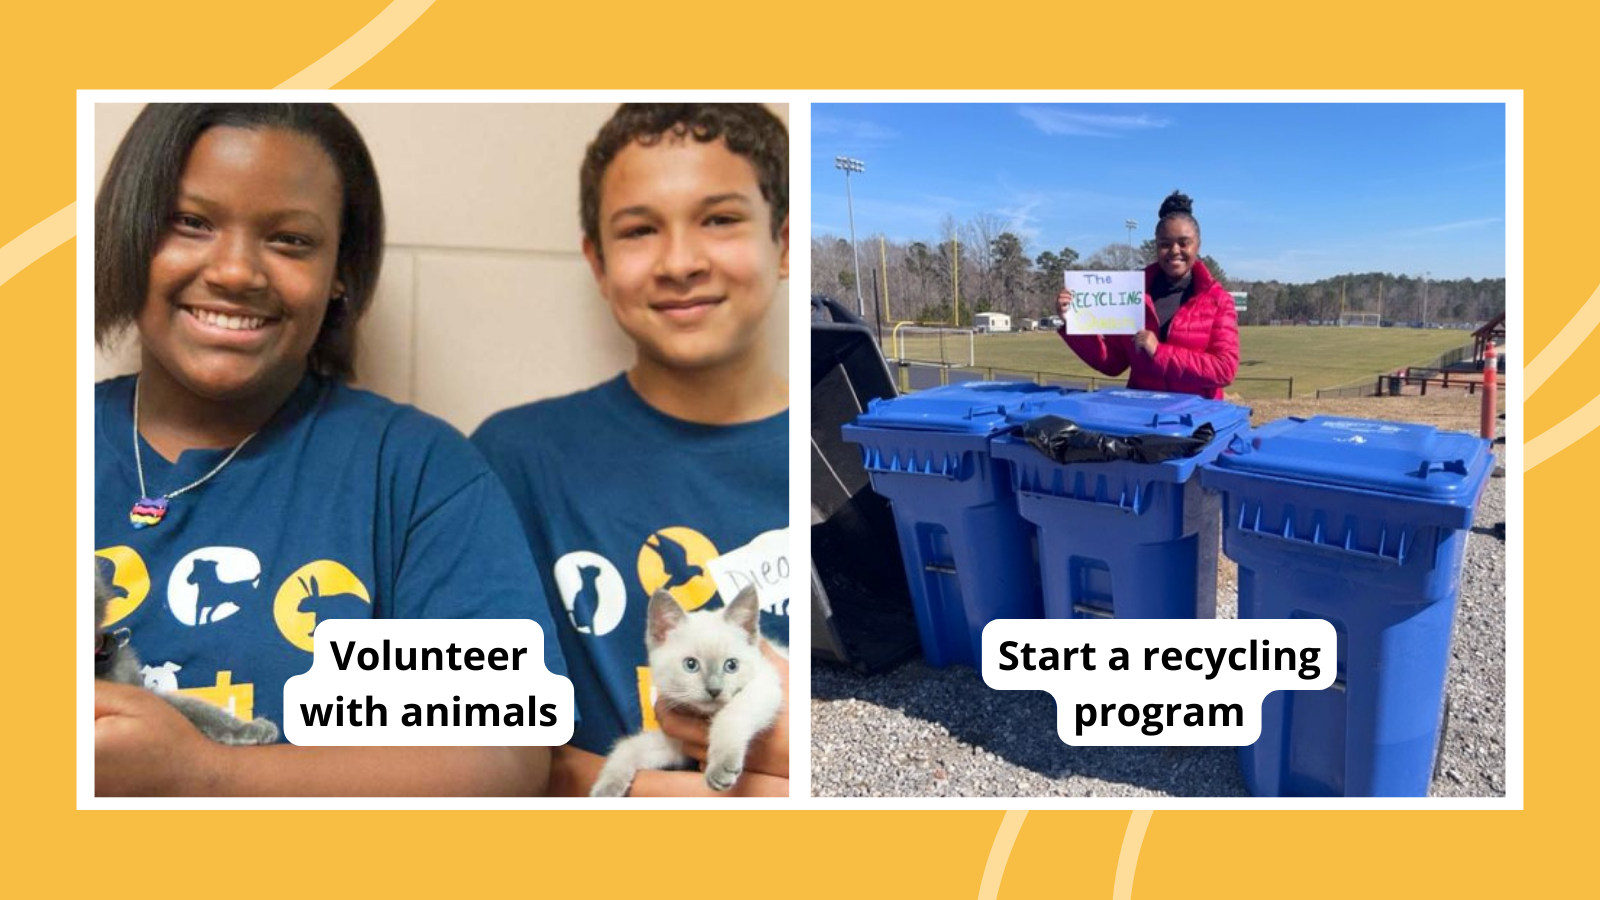 Collage of student service learning projects, including volunteering with animals and starting a recycling program